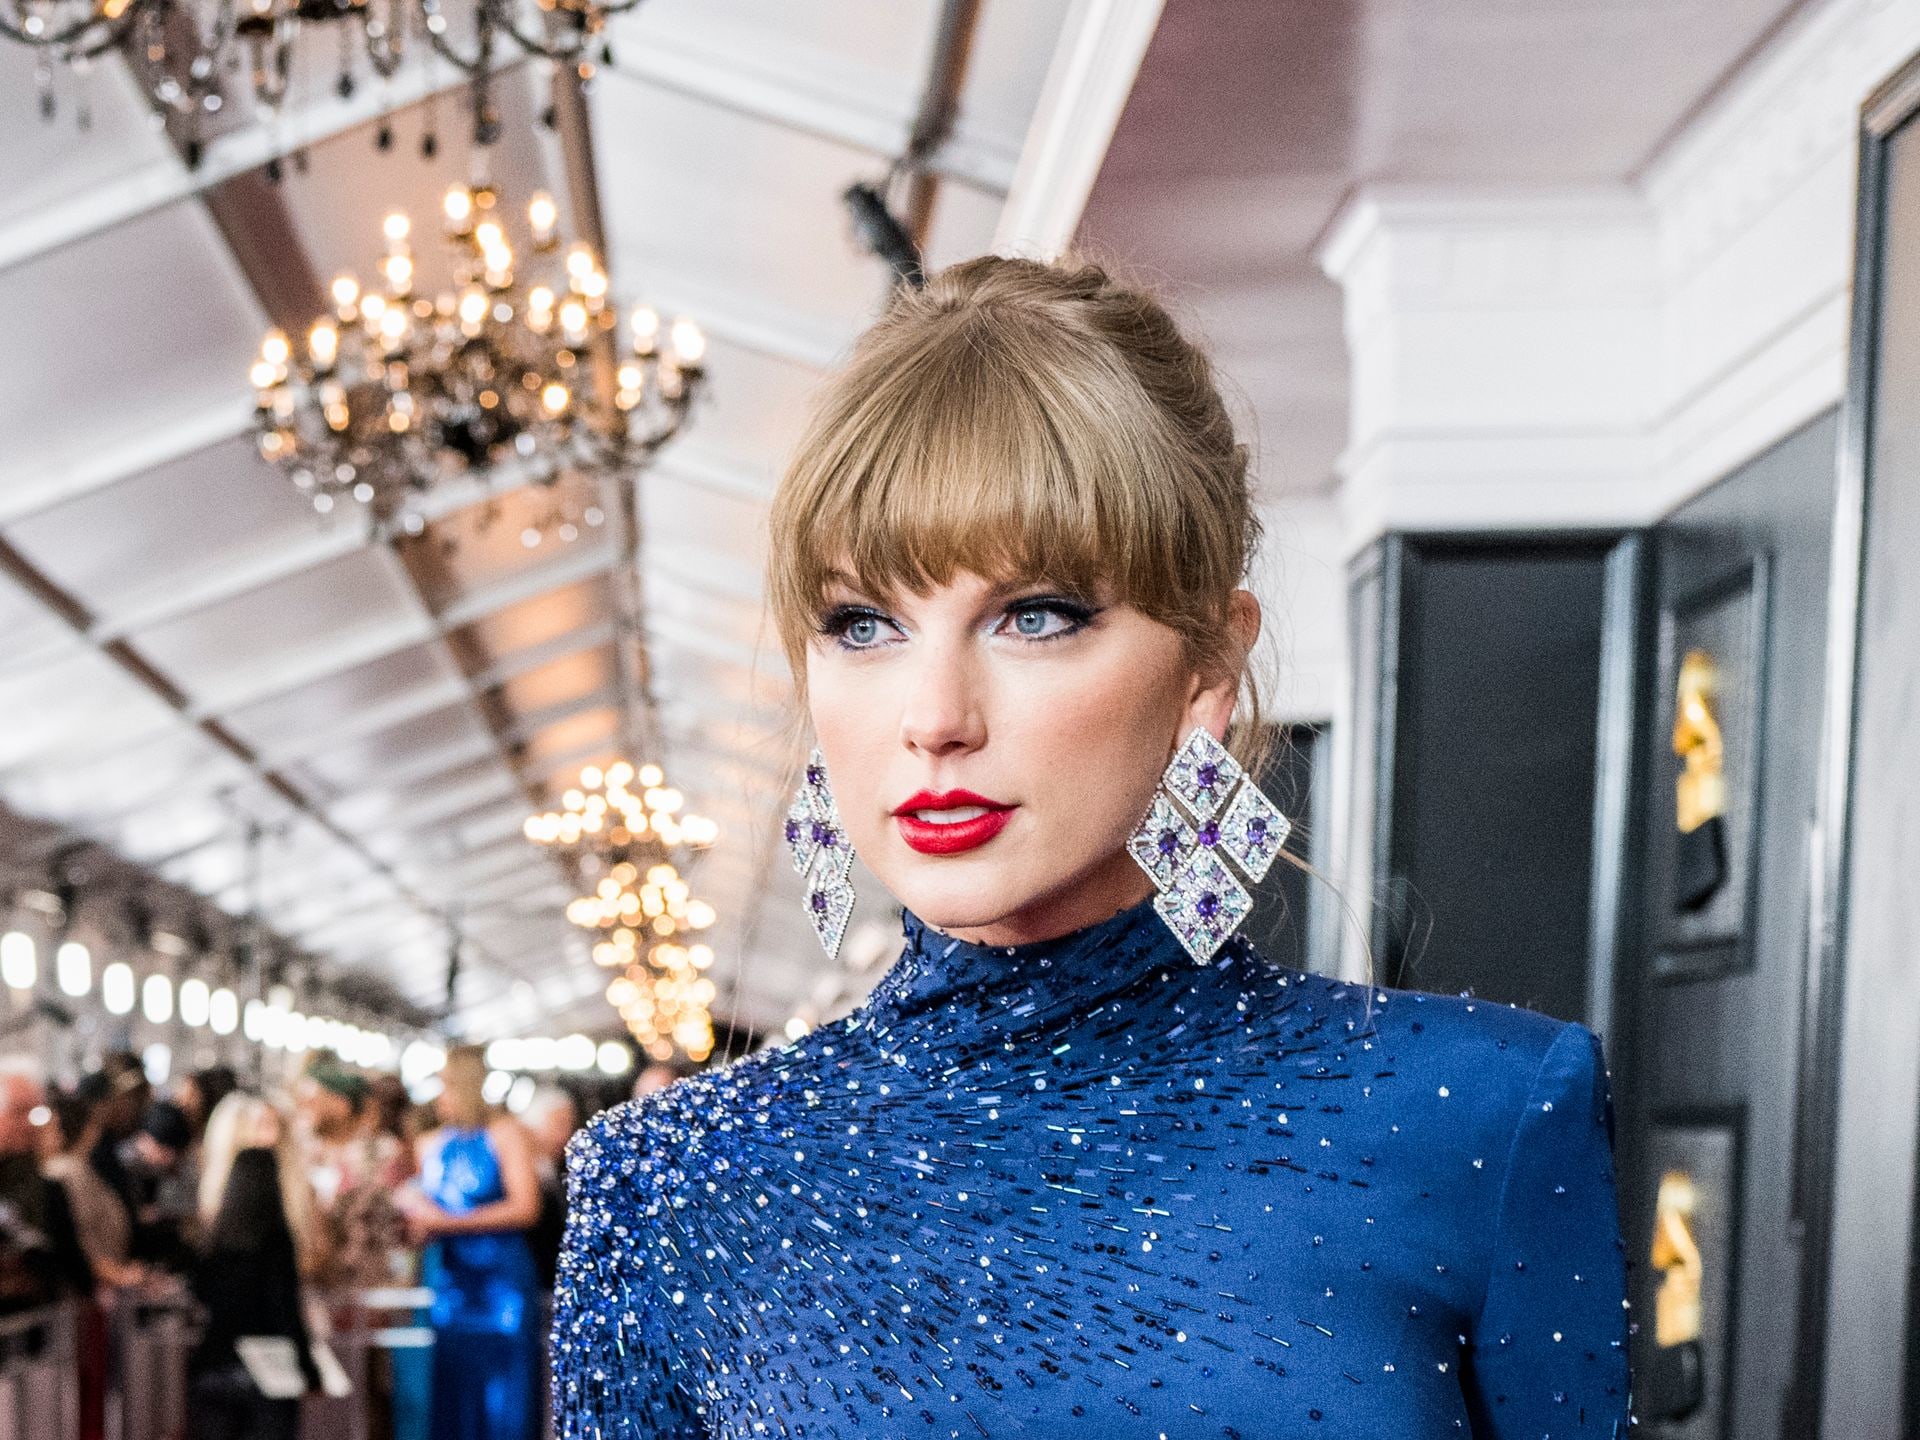 Taylor Swift is a tinsel dream in dazzling bodysuit that took 350